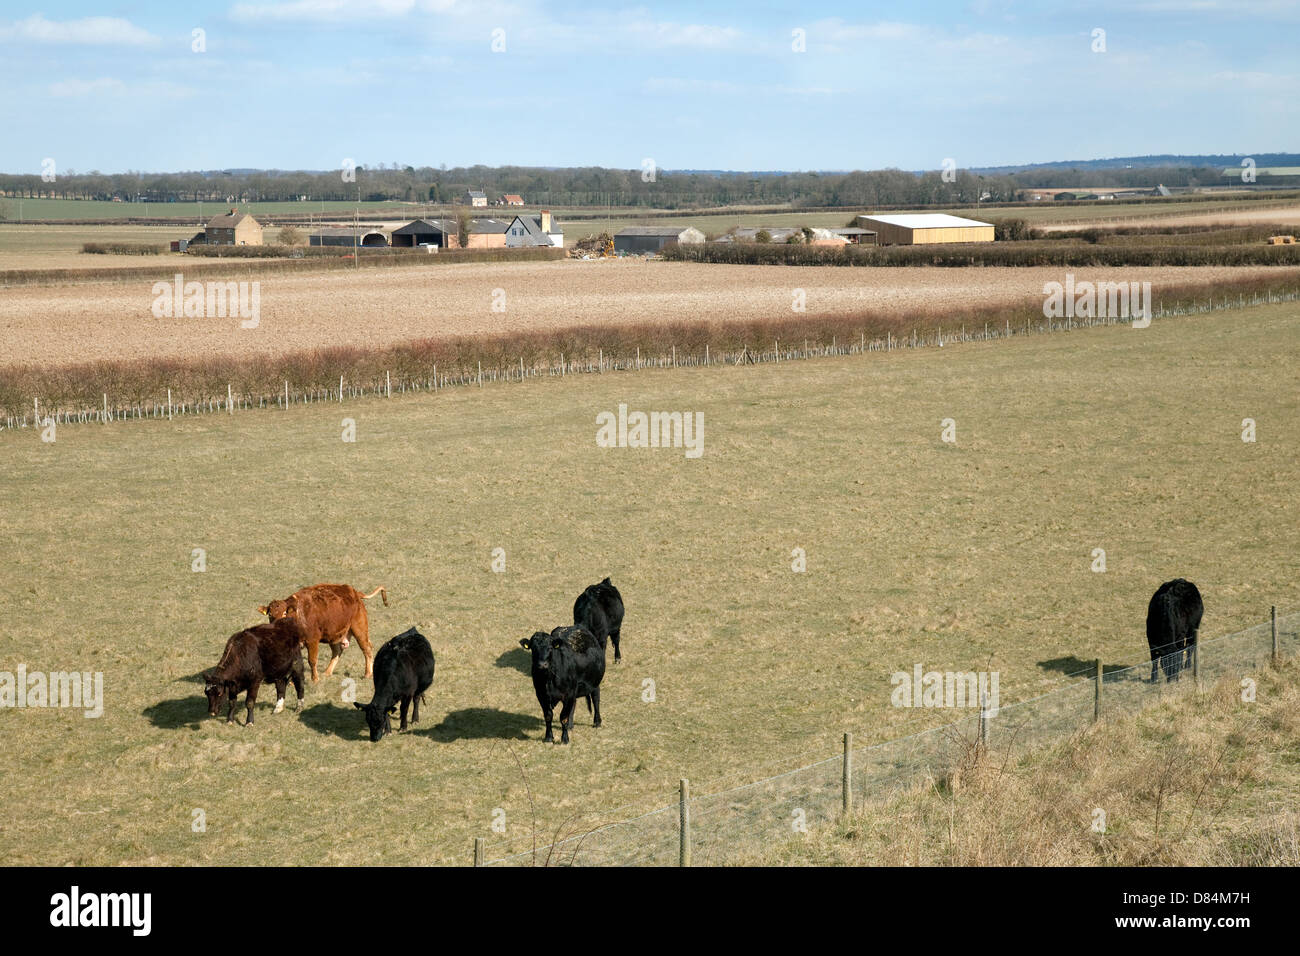 Cows on an east Cambridgeshire farm near Swaffham Prior, example of agriculture or farming, Cambridgeshire East Anglia UK Stock Photo